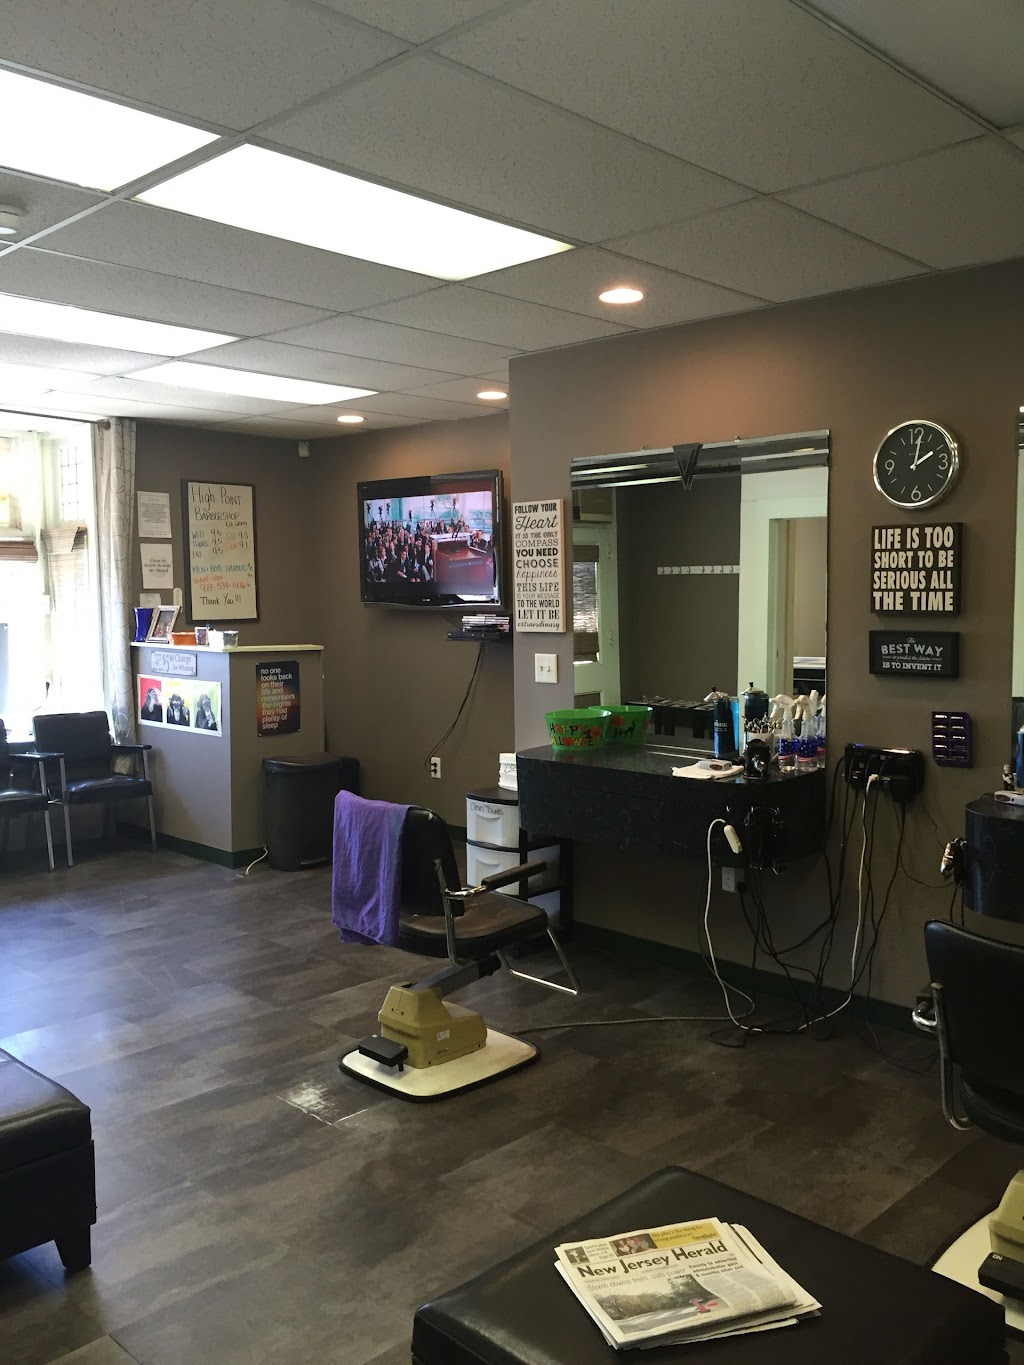 High Point Barber Shop | 37A Hamburg Ave, Sussex, NJ 07461 | Phone: (973) 702-1178